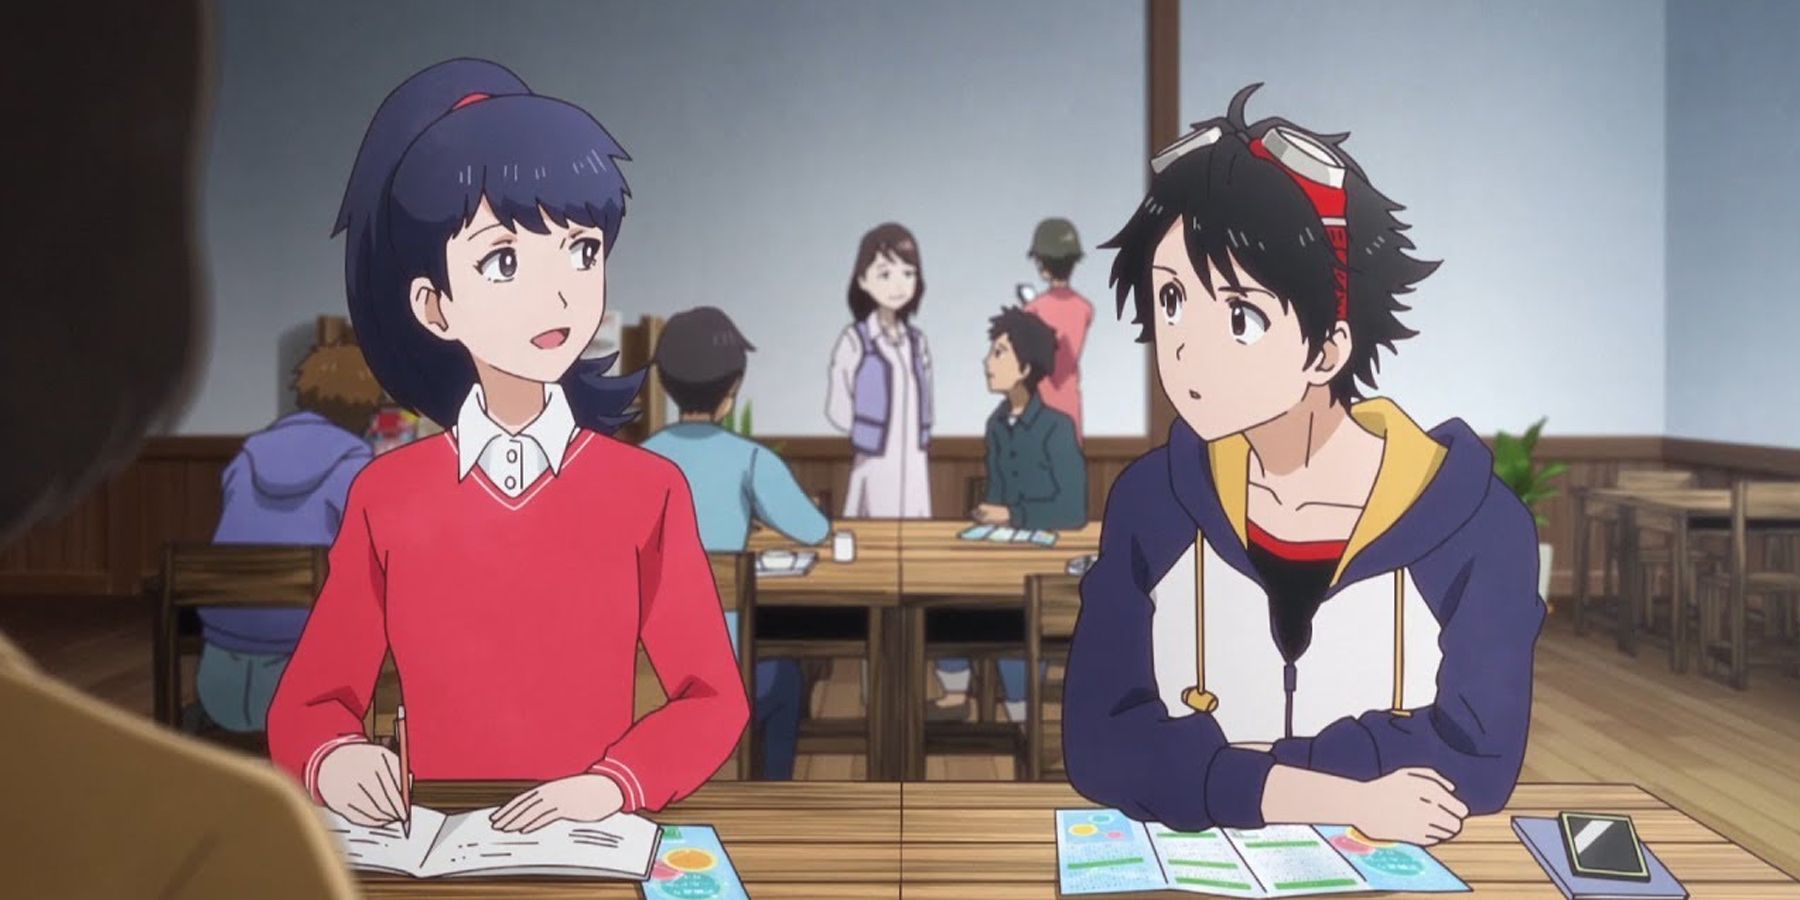 Digimon Survive characters in a classroom